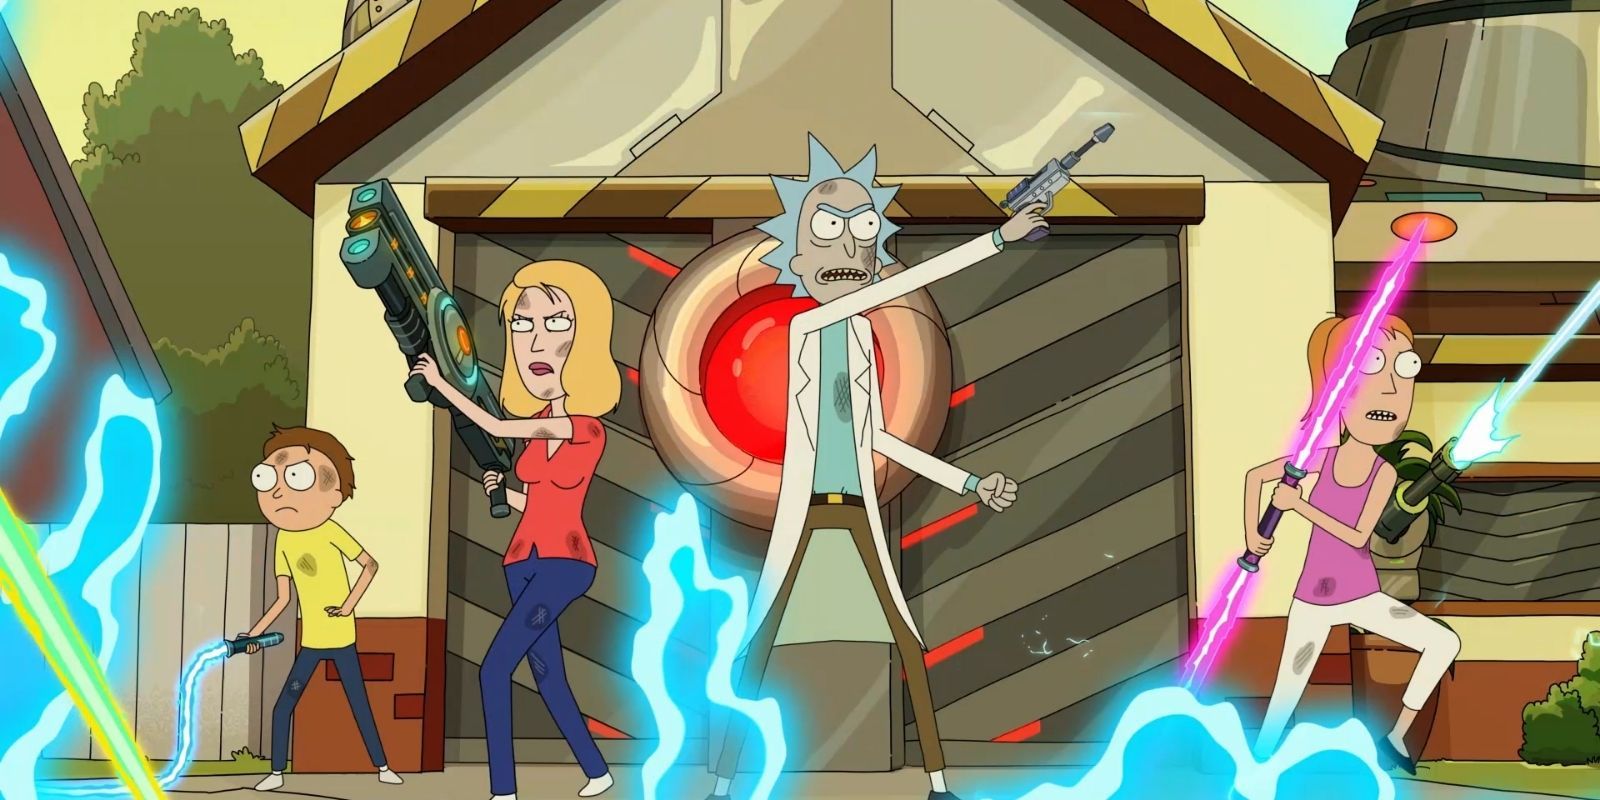 Rick, Morty, Beth and Summer holding weapons, engaged in battle